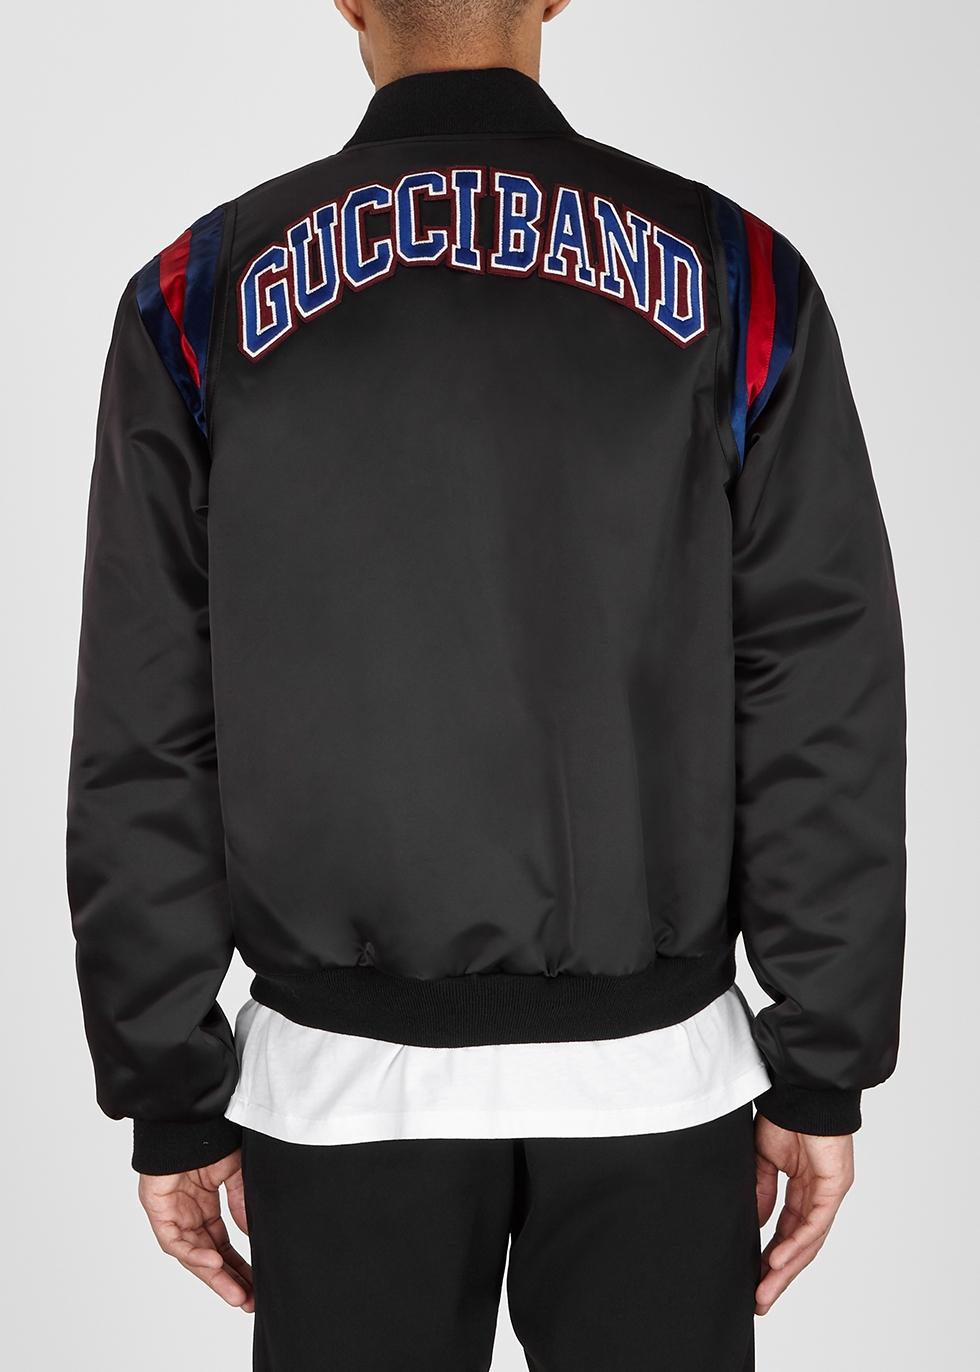 Gucci Band Bomber Jacket in Black for Men | Lyst